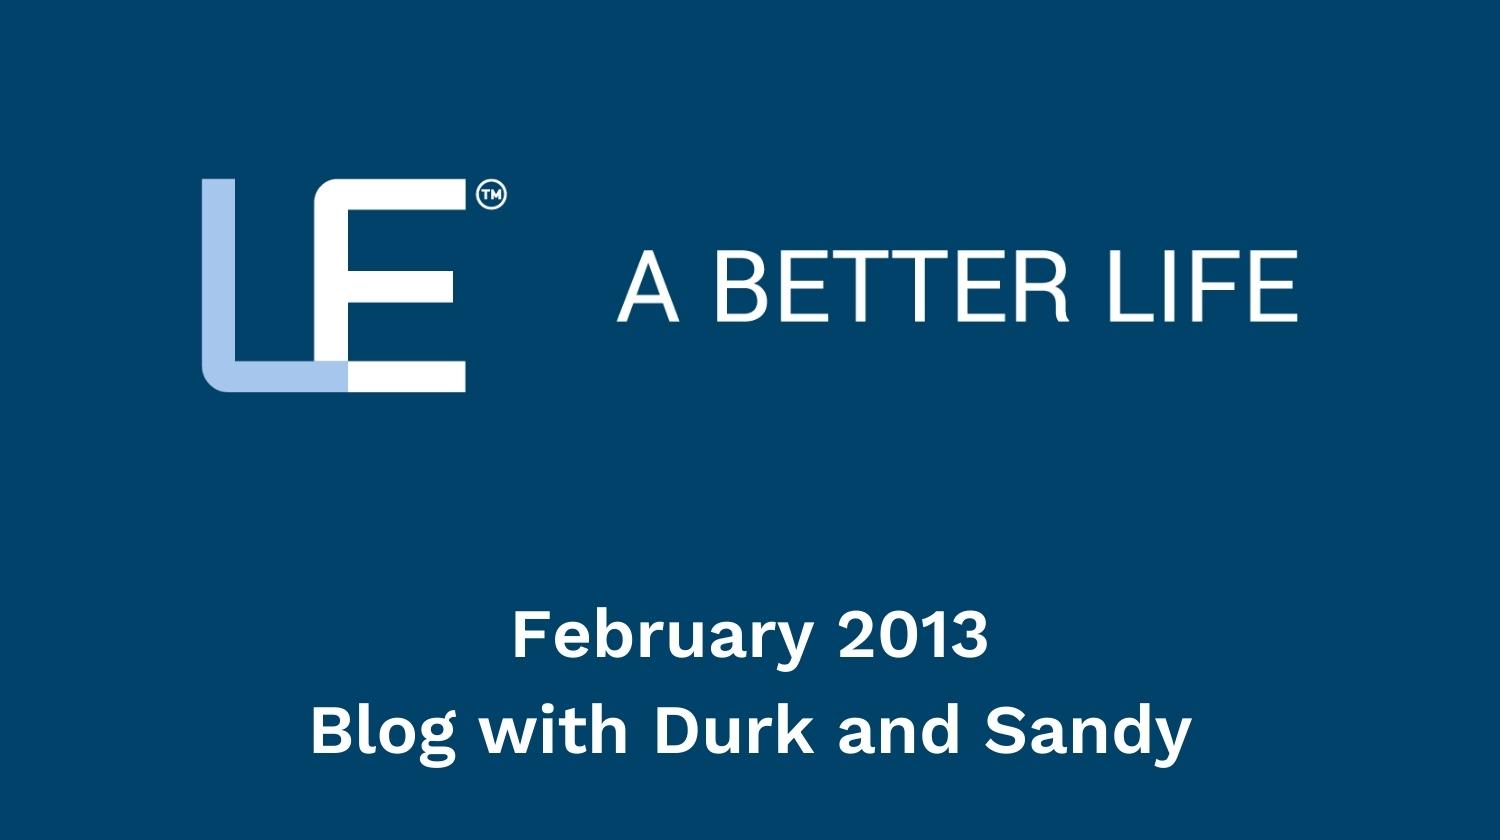 February 2013 Blog with Durk and Sandy